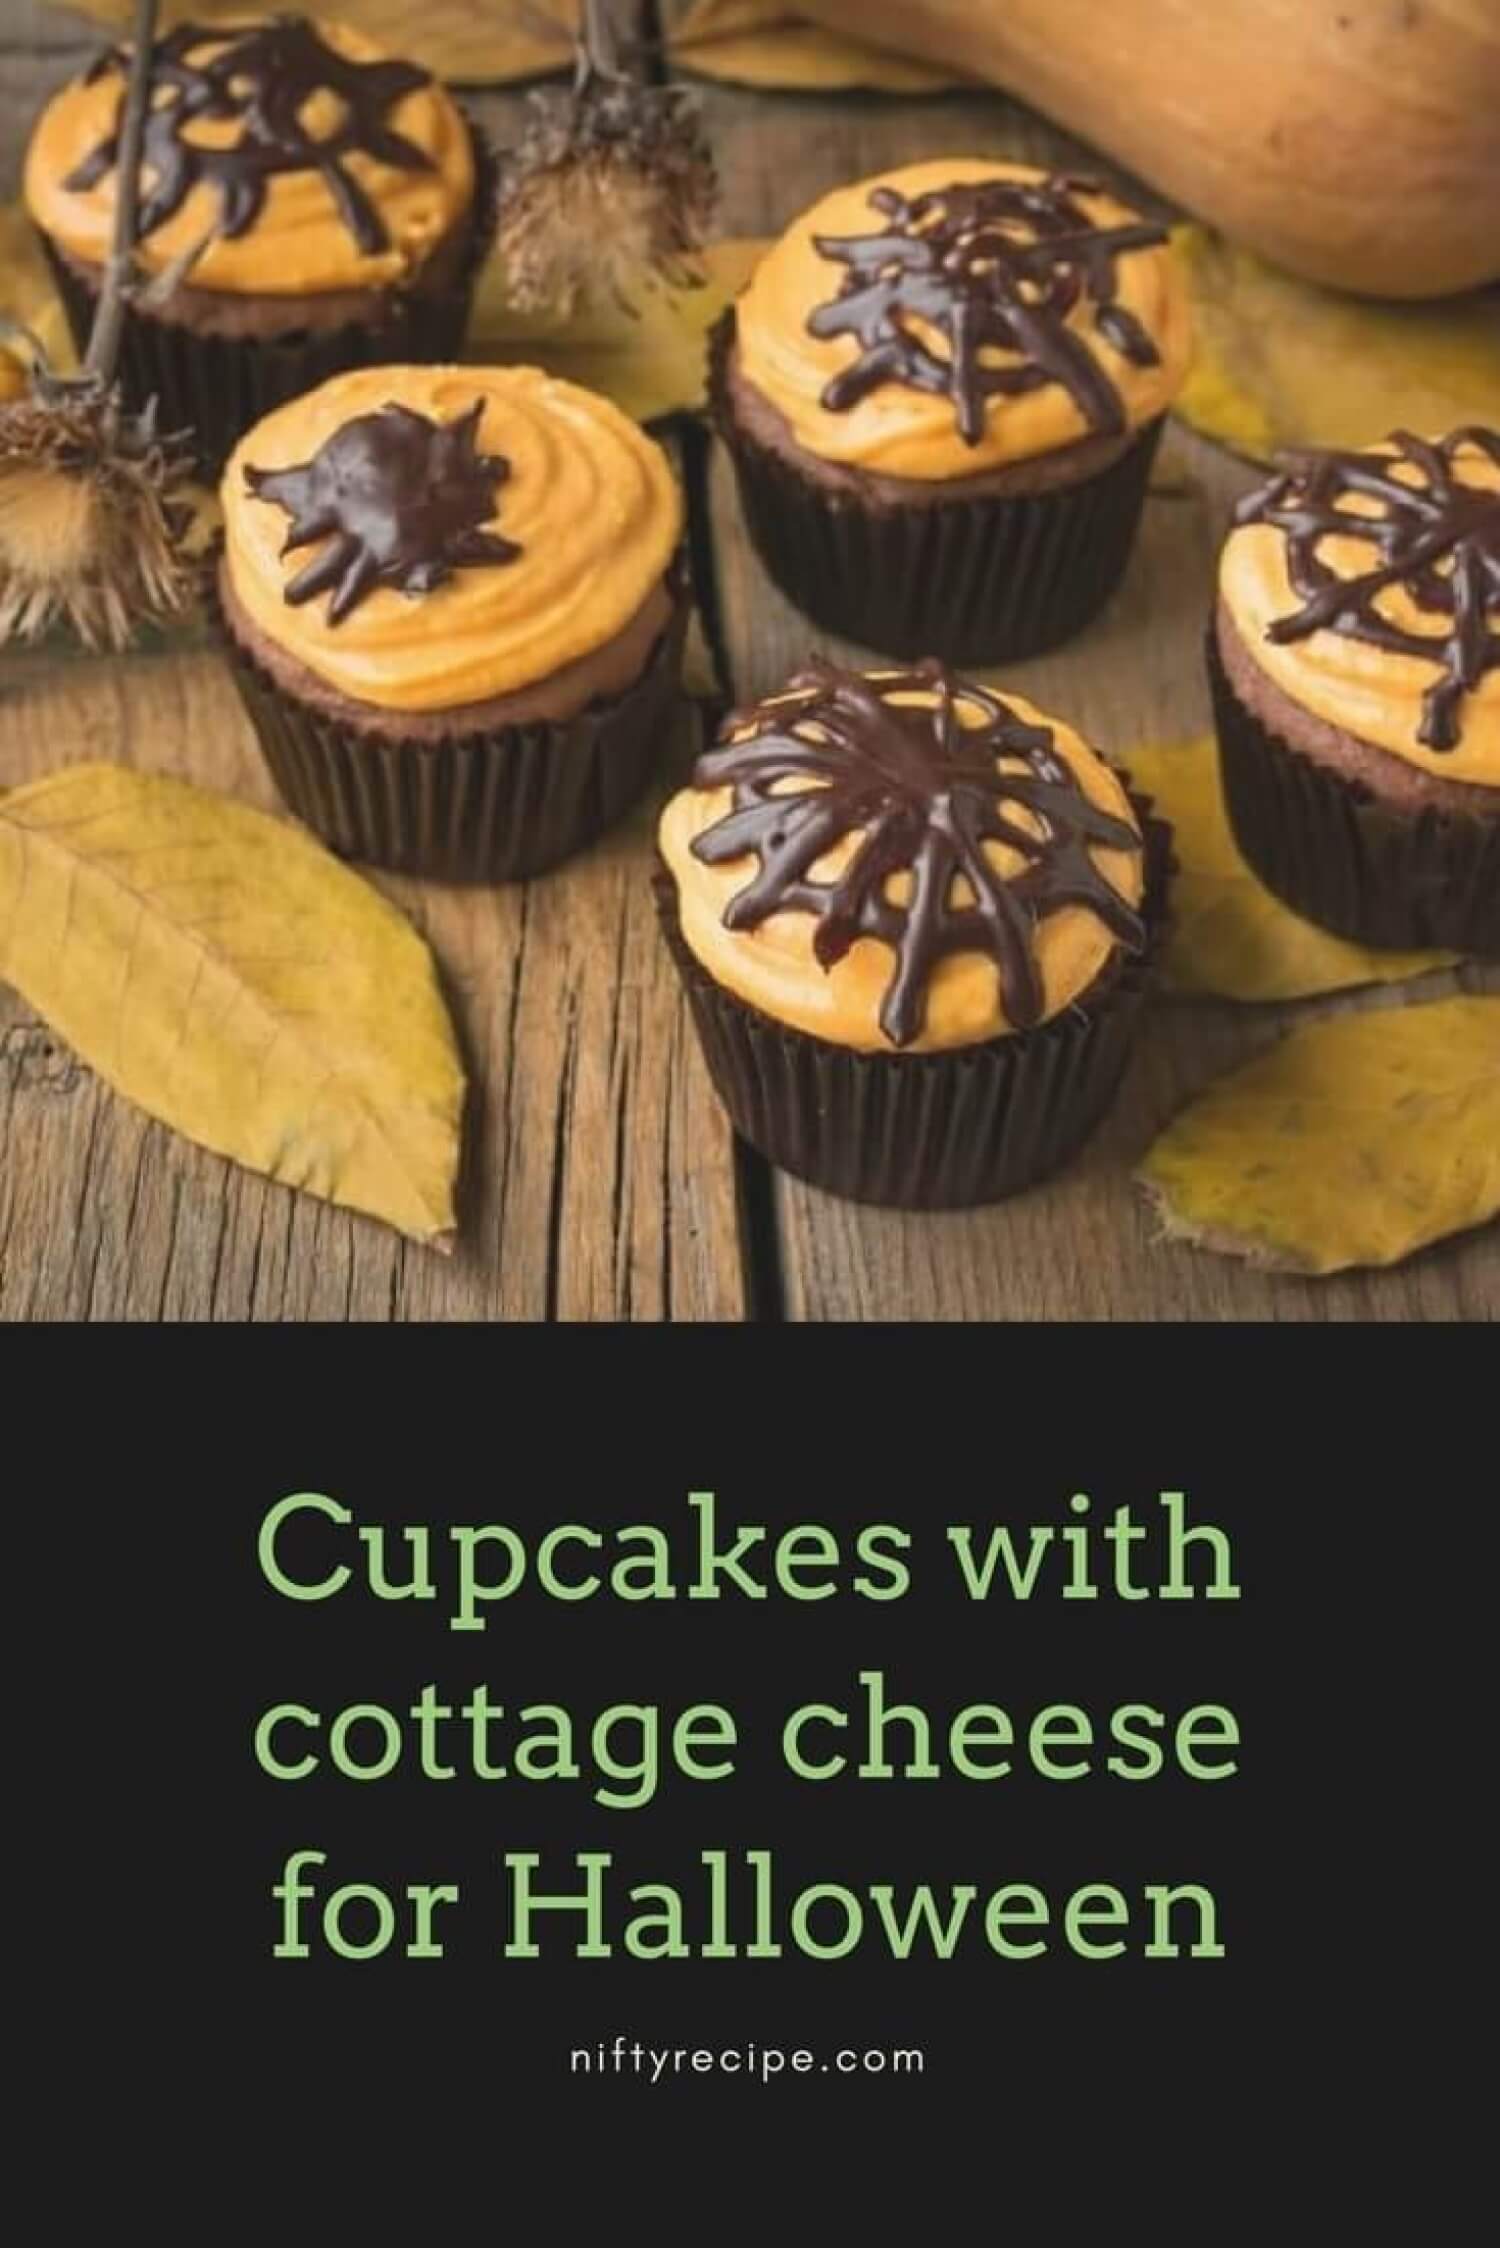 Cupcakes with cottage cheese for Halloween